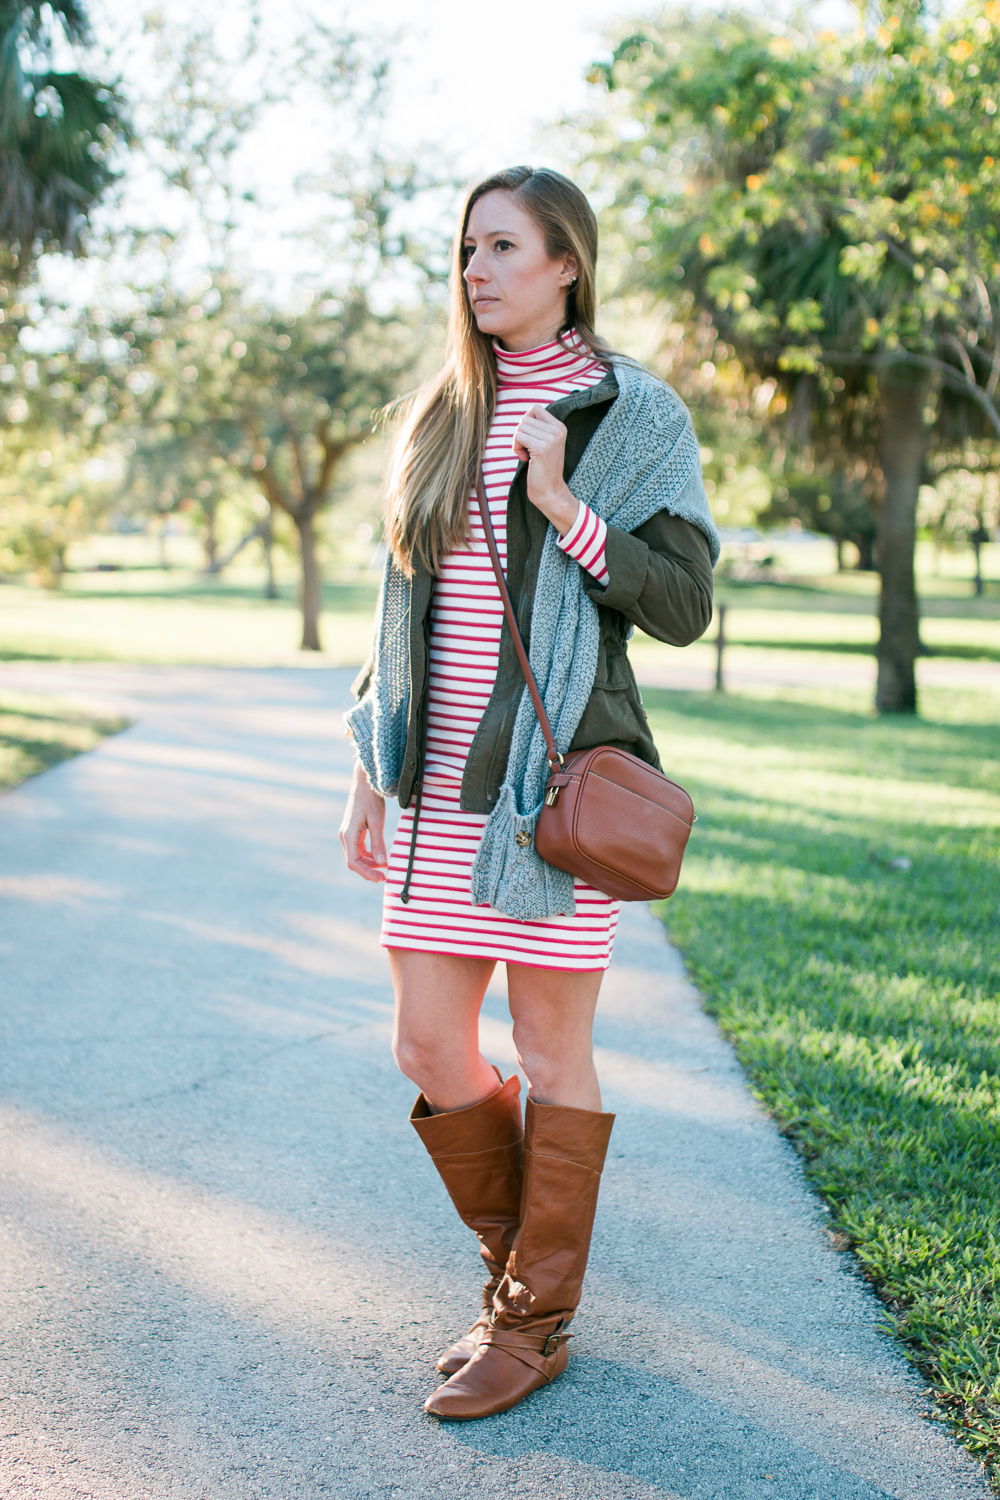 7 Winter Outfit Ideas for Warm Weather / Winter Outfit Inspiration / Striped Dress for Winter / Striped Turtleneck Dress / Leather Riding Boots 